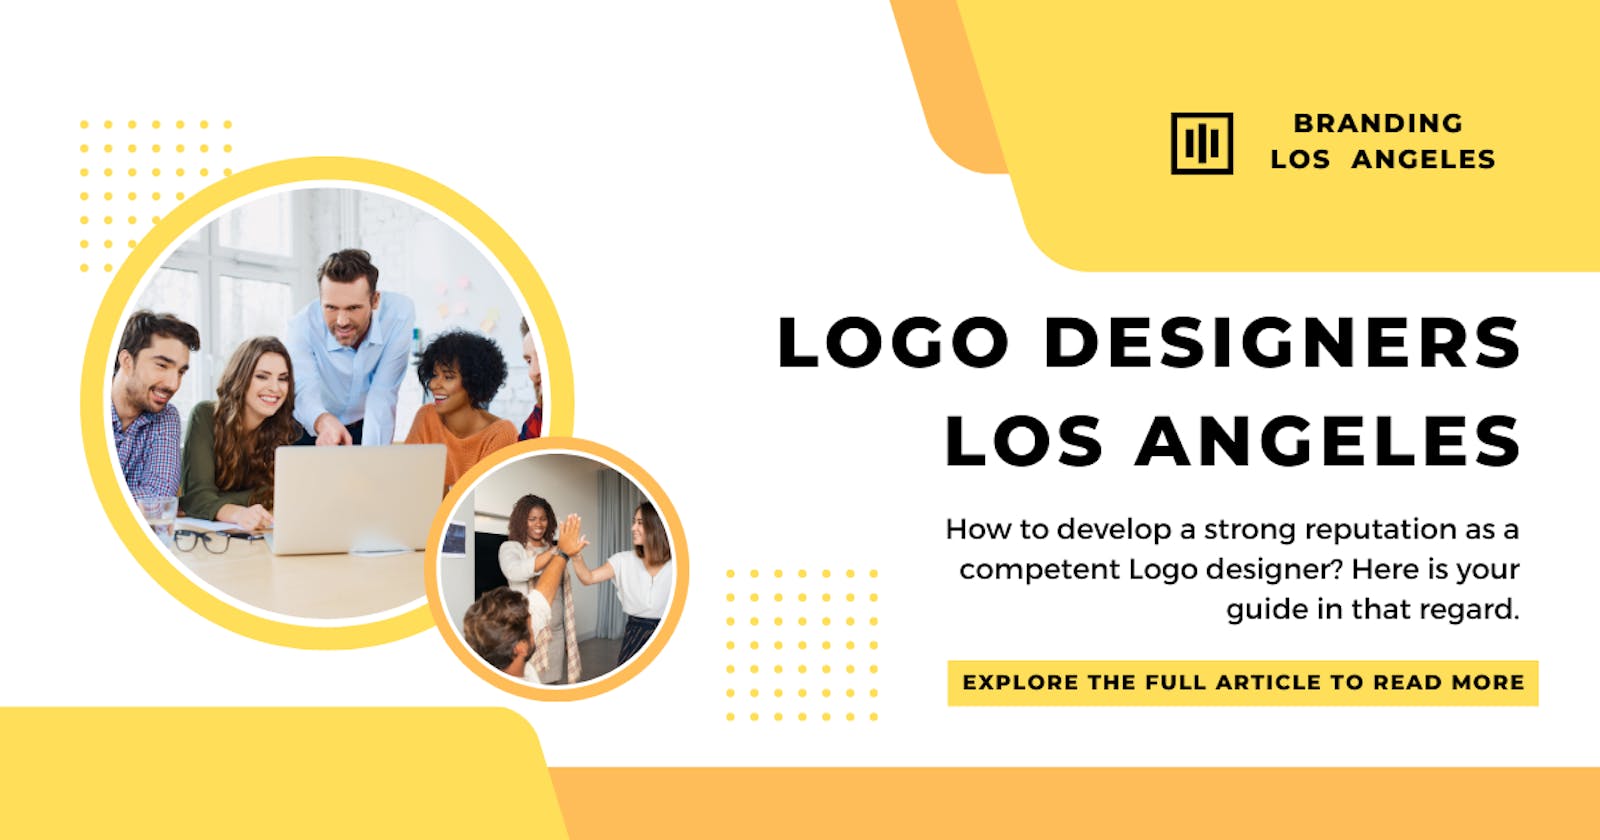 How To Consolidate Your Reputation As Logo Designers Los Angeles?